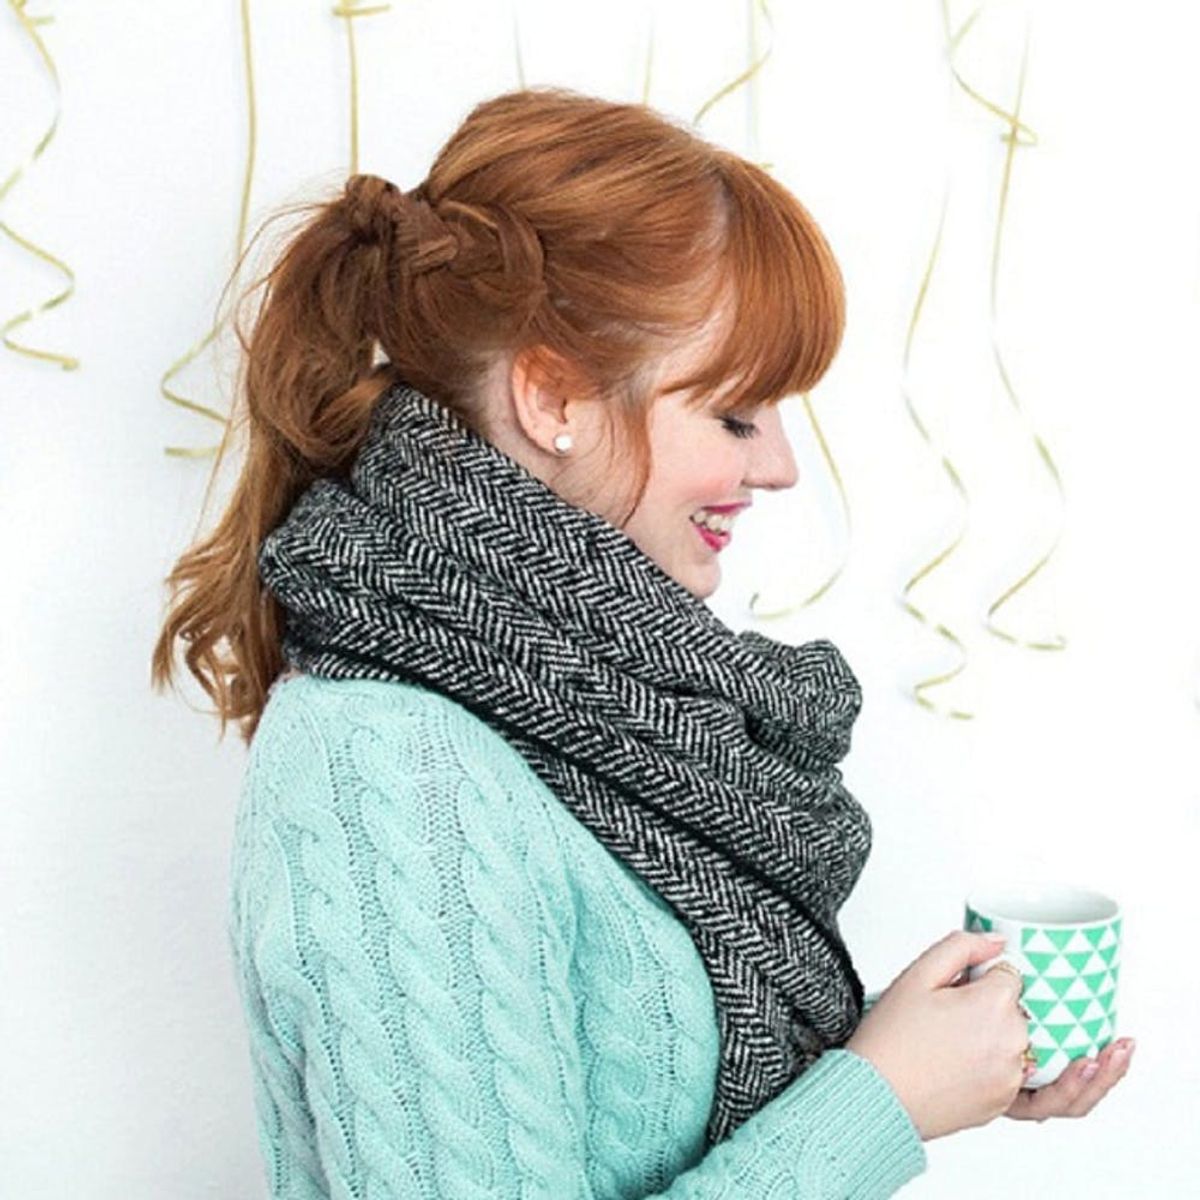 How to Make This Easy No-Sew Blanket Scarf